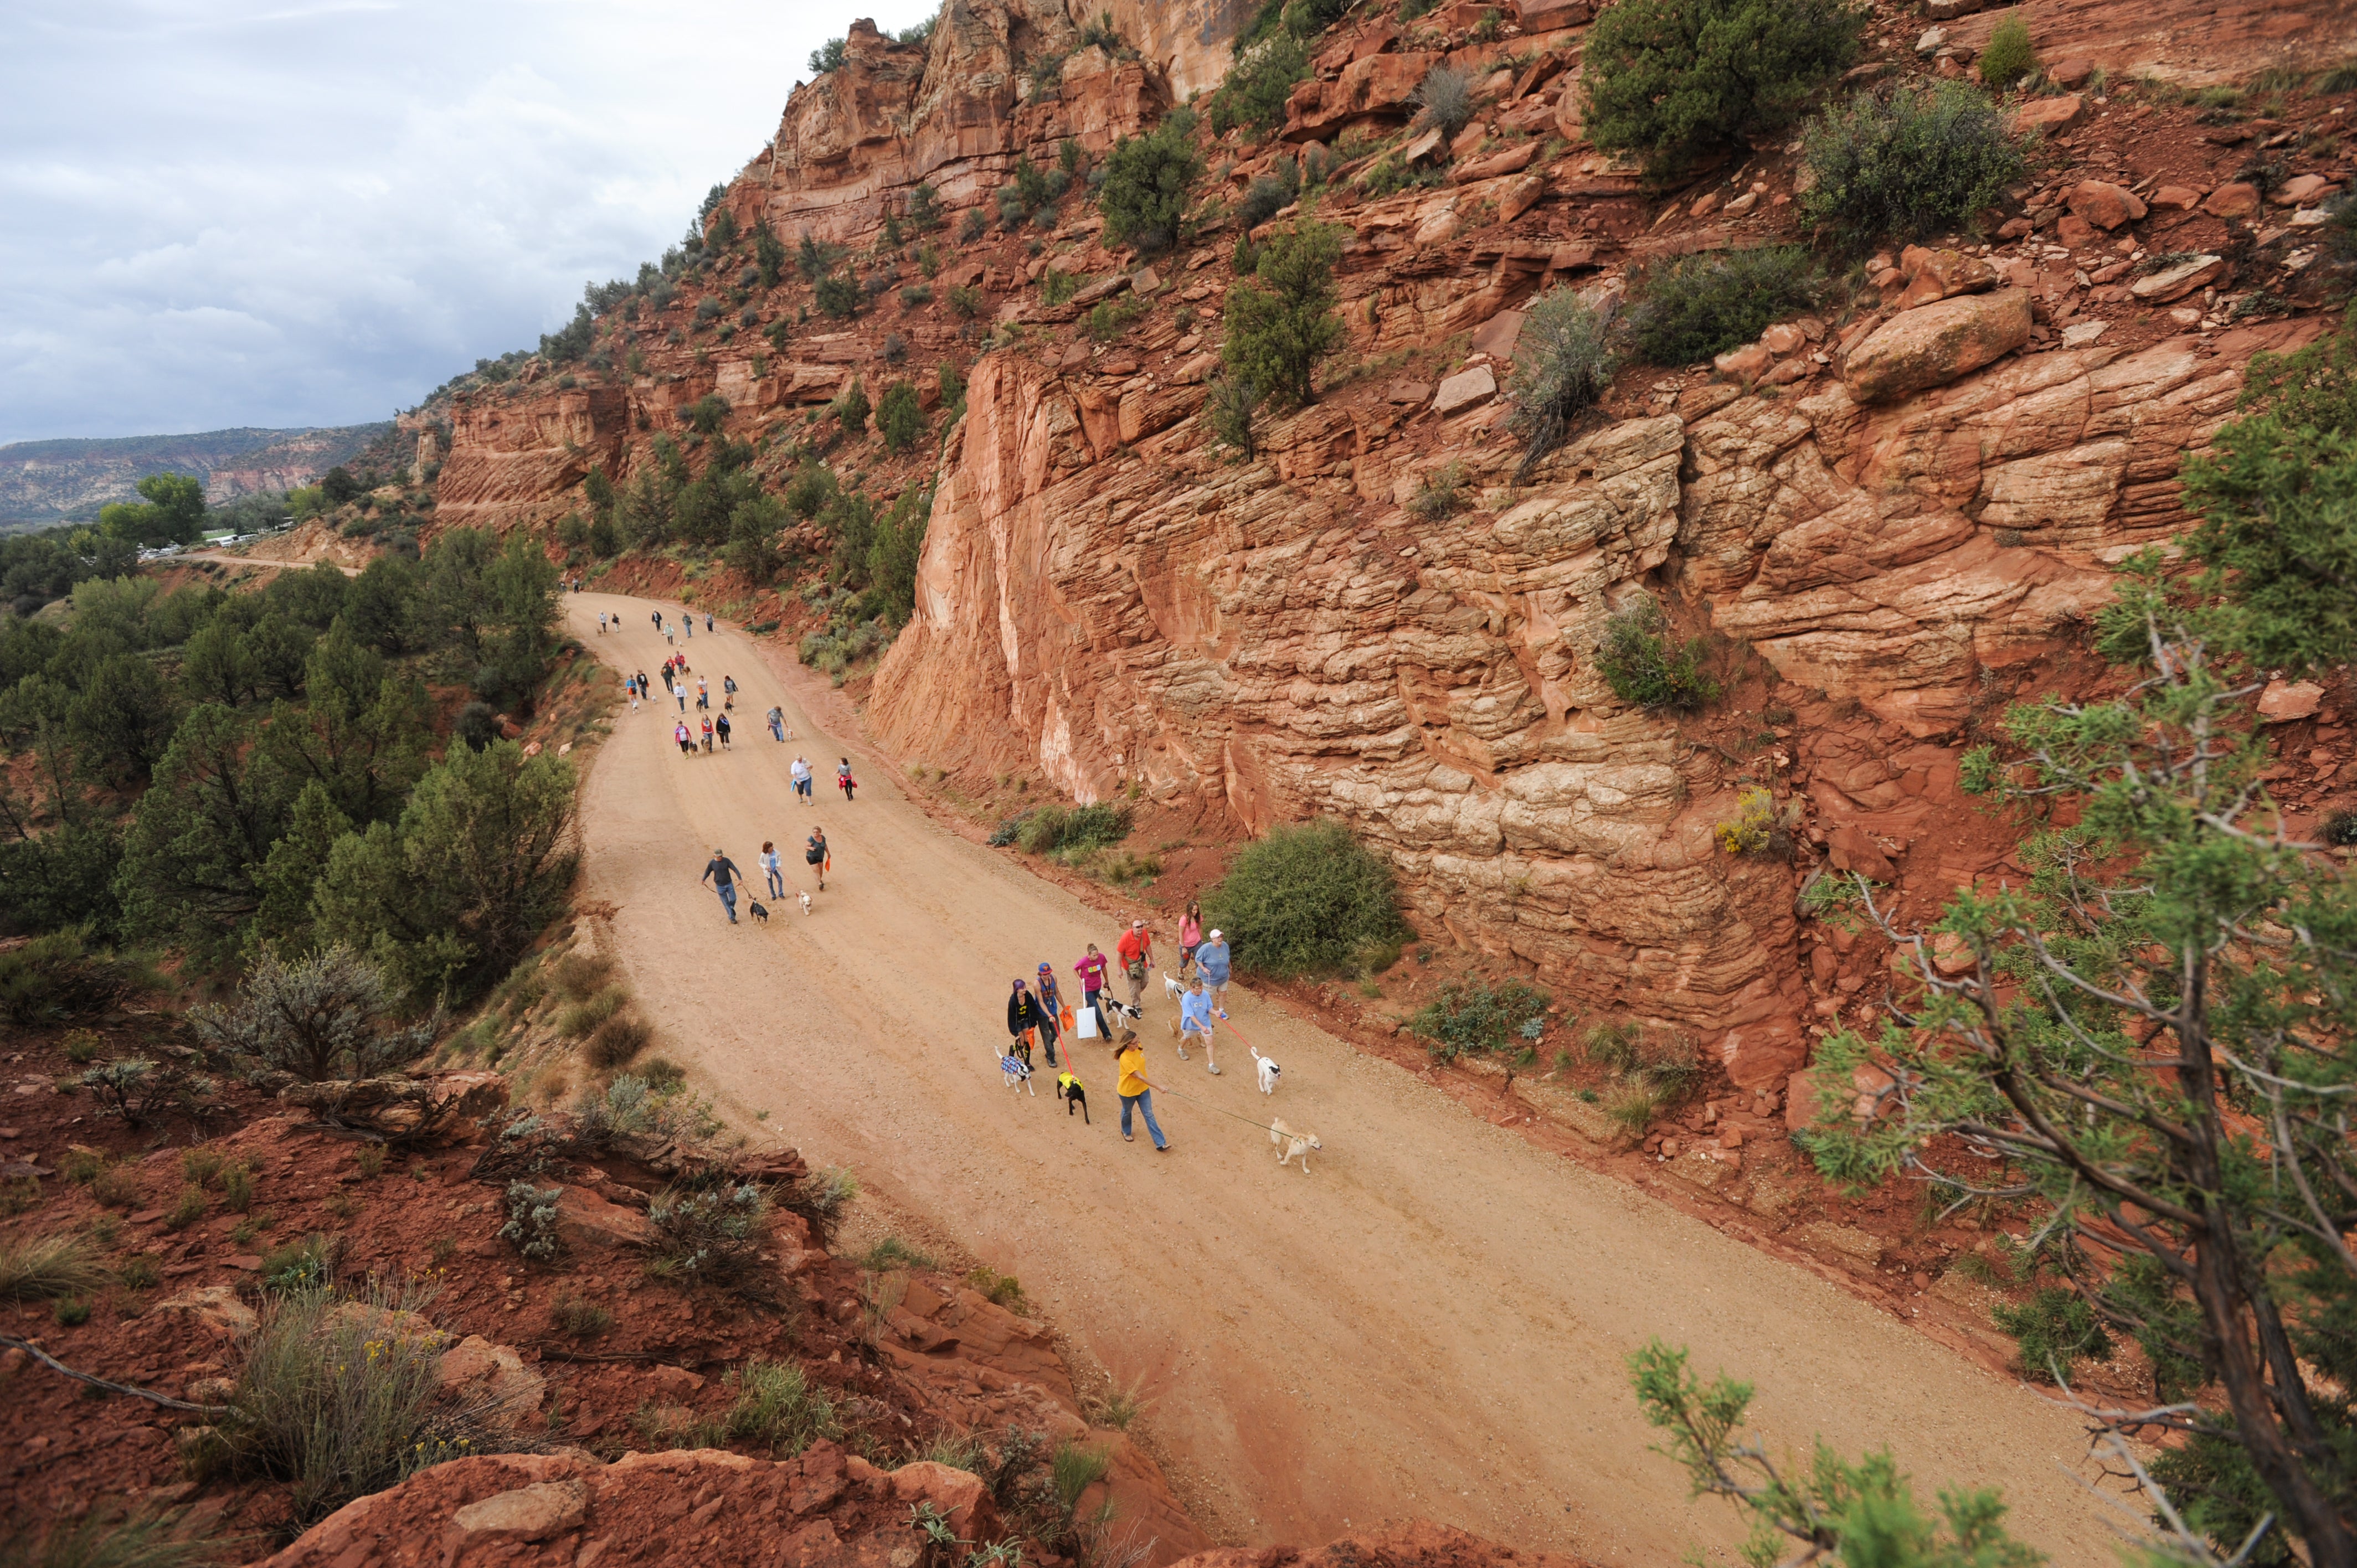 In 2014, strutters and their pups took a fun, lifesaving walk at the majestic Best Friends Animal Sanctuary in Kanab, Utah, while raising nearly $50,000 for homeless pets.